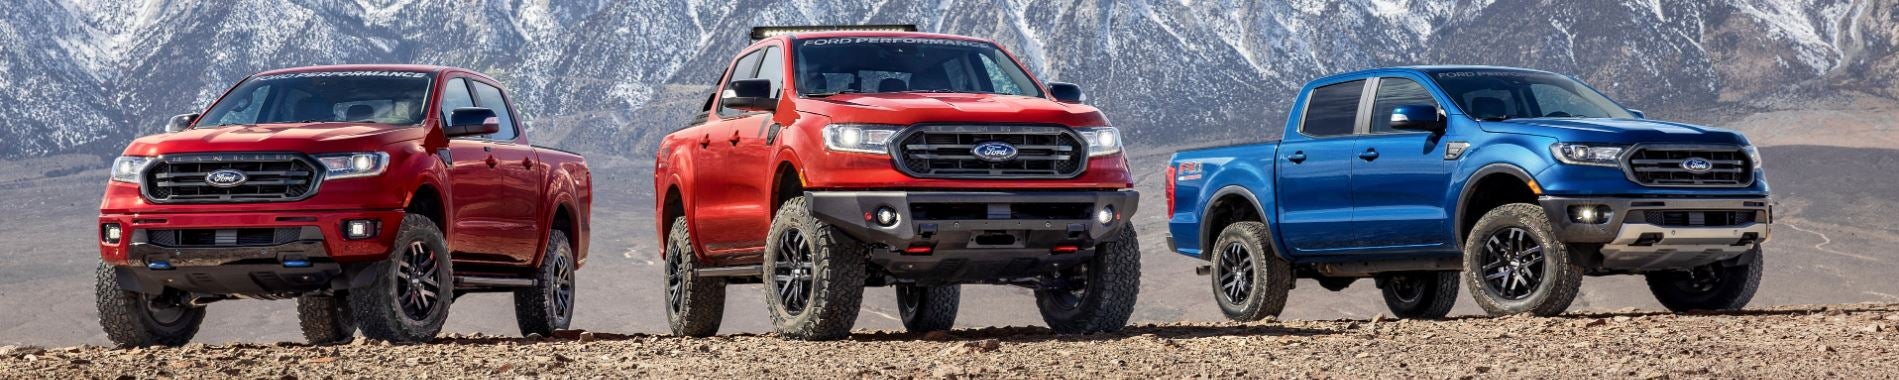 2021 Ford Rangers